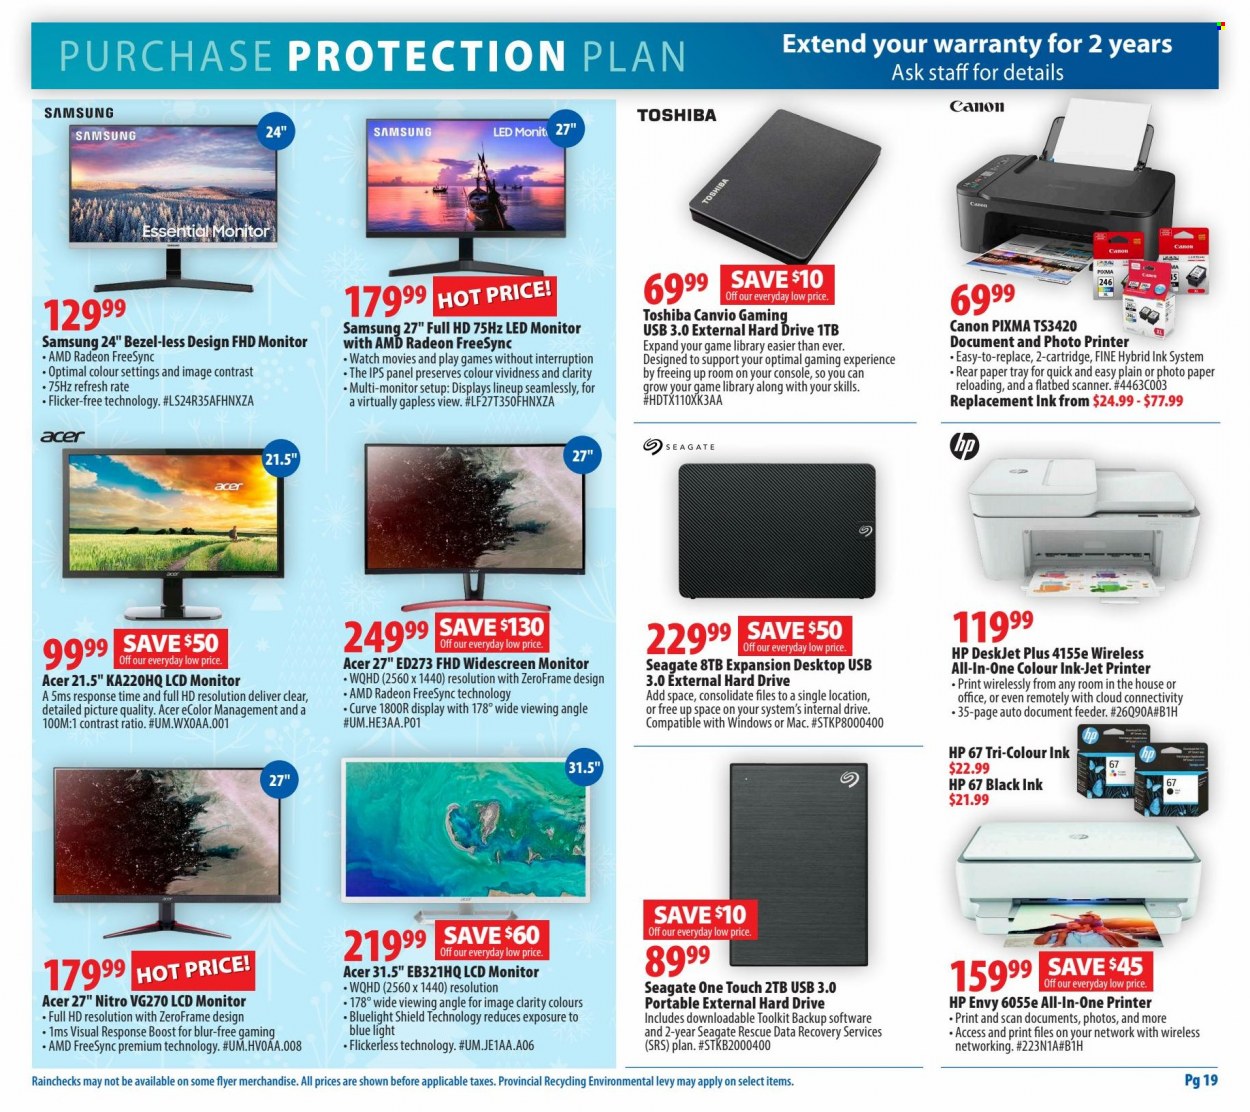 thumbnail - London Drugs Flyer - December 02, 2022 - December 07, 2022 - Sales products - Hewlett Packard, Boost, Samsung, hp envy, Seagate, hard disk, Radeon, AMD Radeon, all-in-one printer, printer, HP DeskJet, scanner, Acer, Canon, monitor, Toshiba. Page 19.